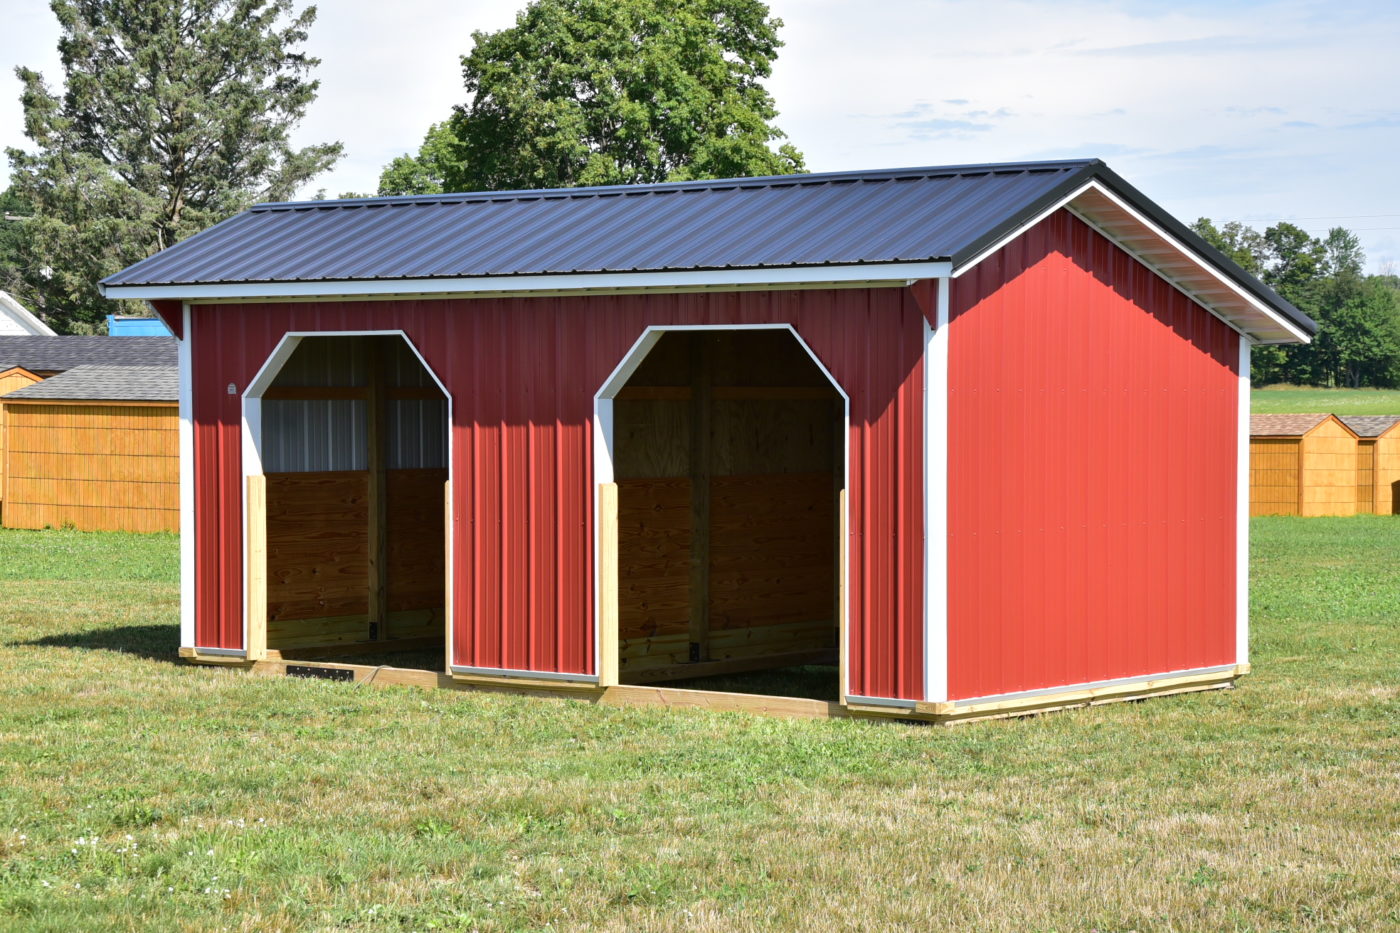 Deluxe Horse Barns For Sale In Sears, Michigan